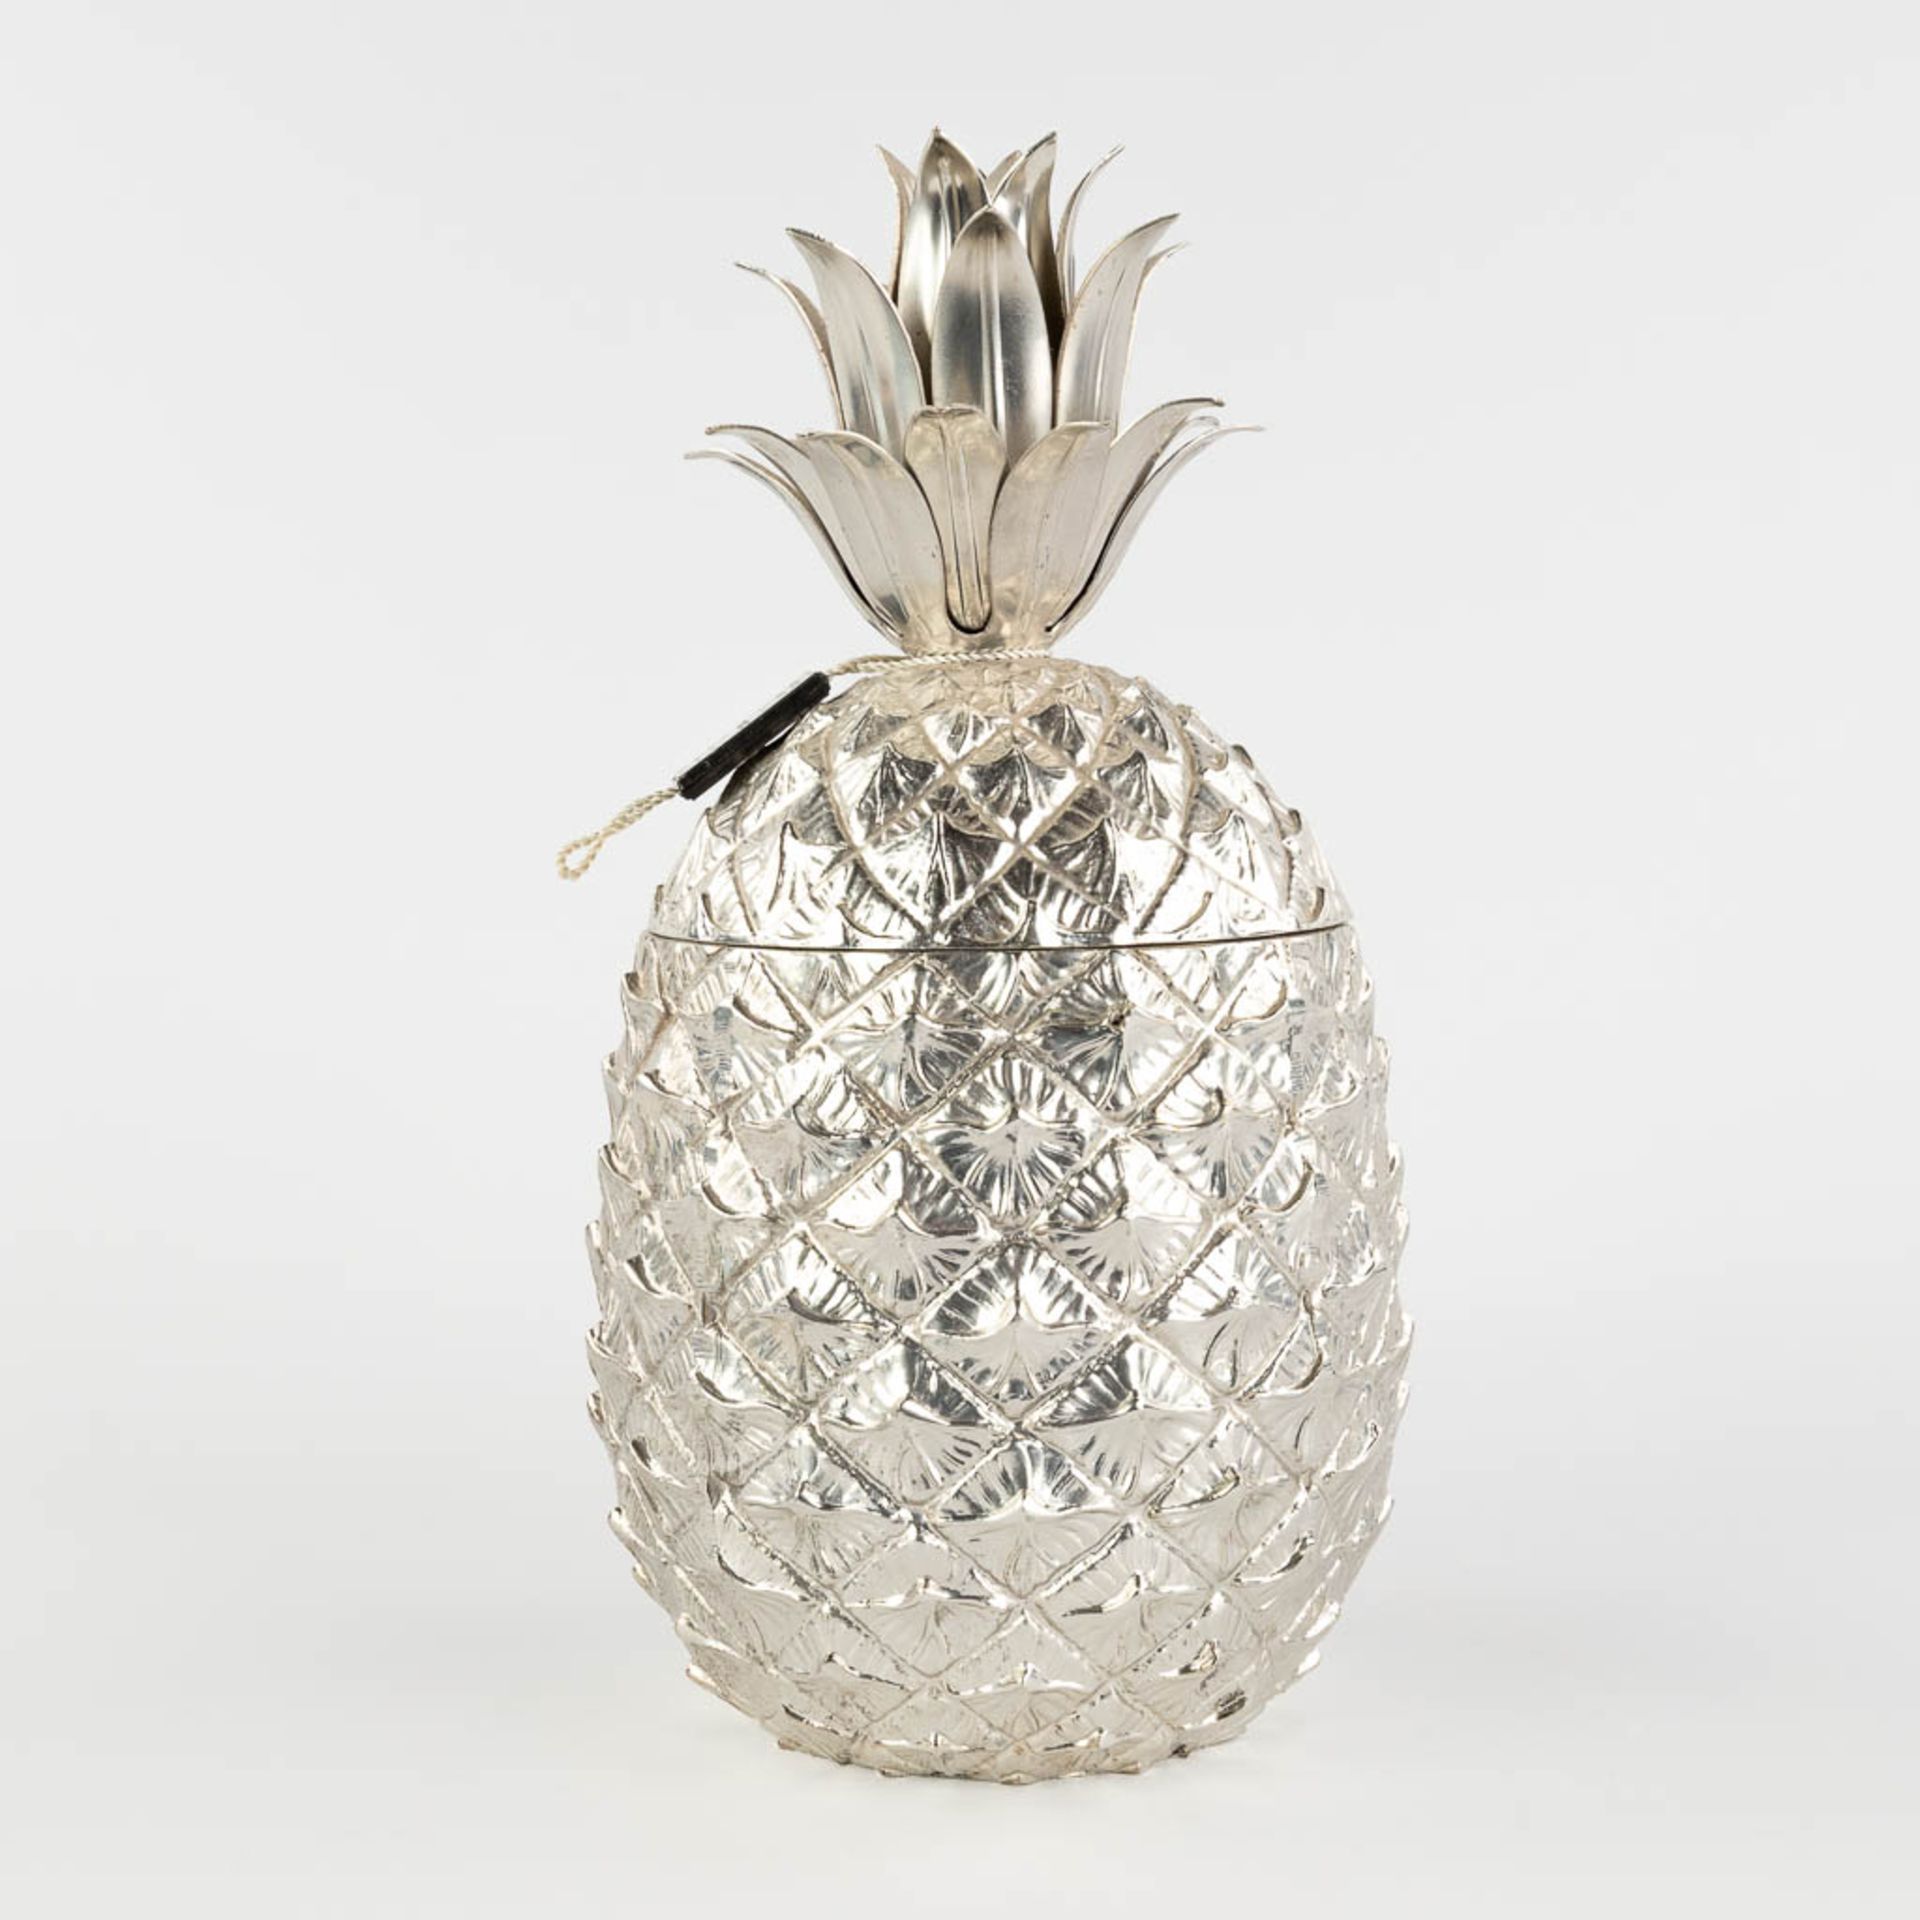 Mauro MANETTI (XX) 'Pineapple' an ice pail. (H:26 x D:14 cm) - Image 6 of 13